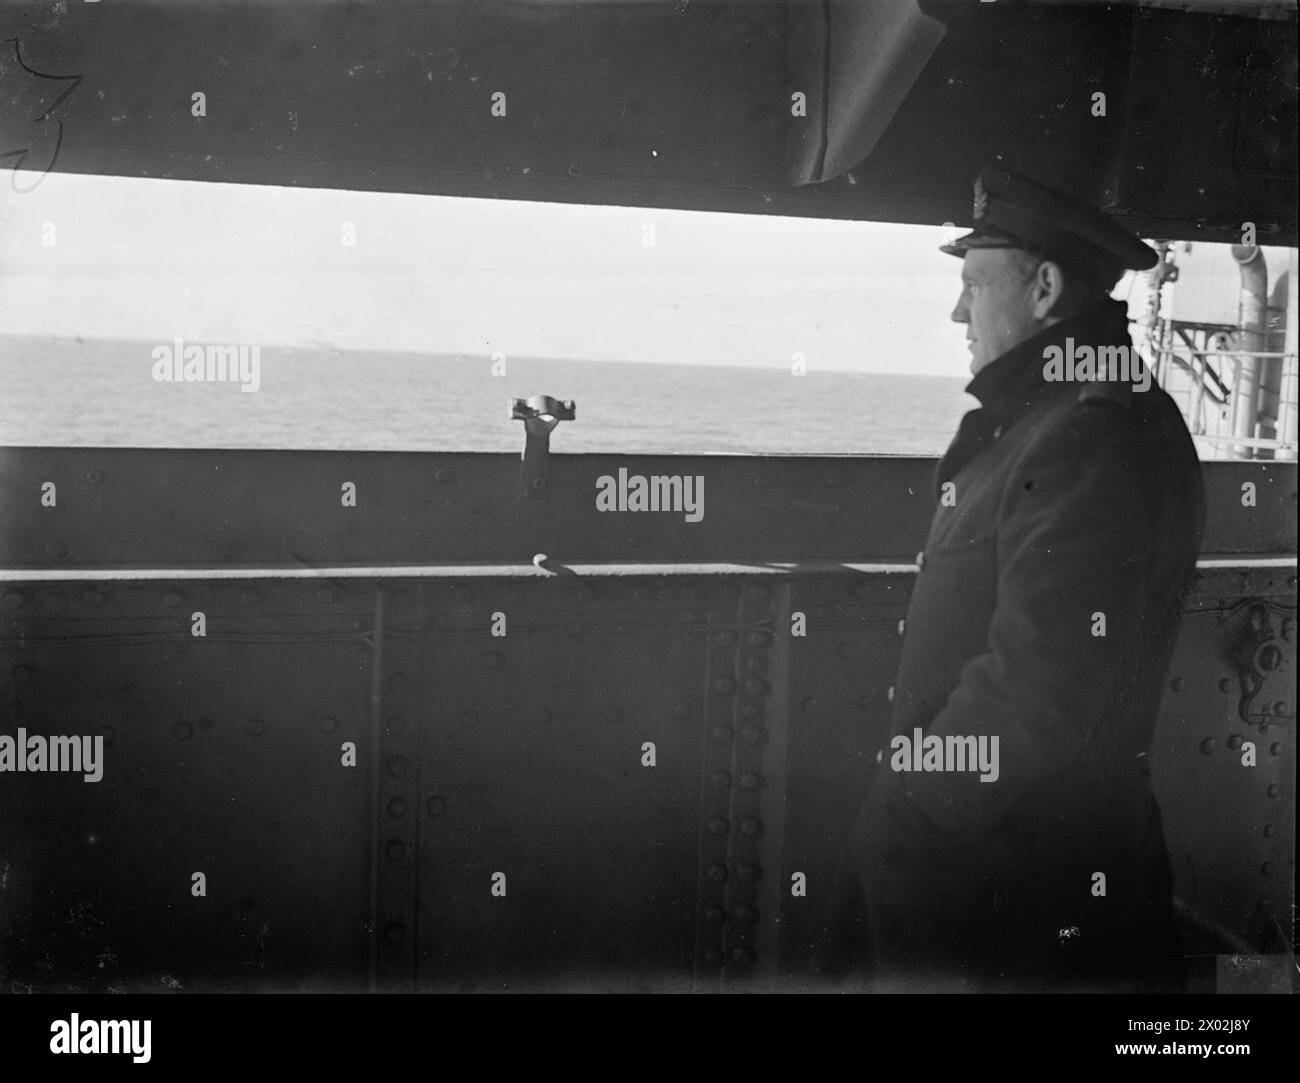 ON BOARD THE BATTLESHIP HMS RODNEY AT SEA. 1940. - Captain Dalrymple-Hamilton, RN, Captain of HMS RODNEY watching the convoy from the back of the bridge. From now on it is his responsibility to see that the convoy is not molested by the German raider Stock Photo